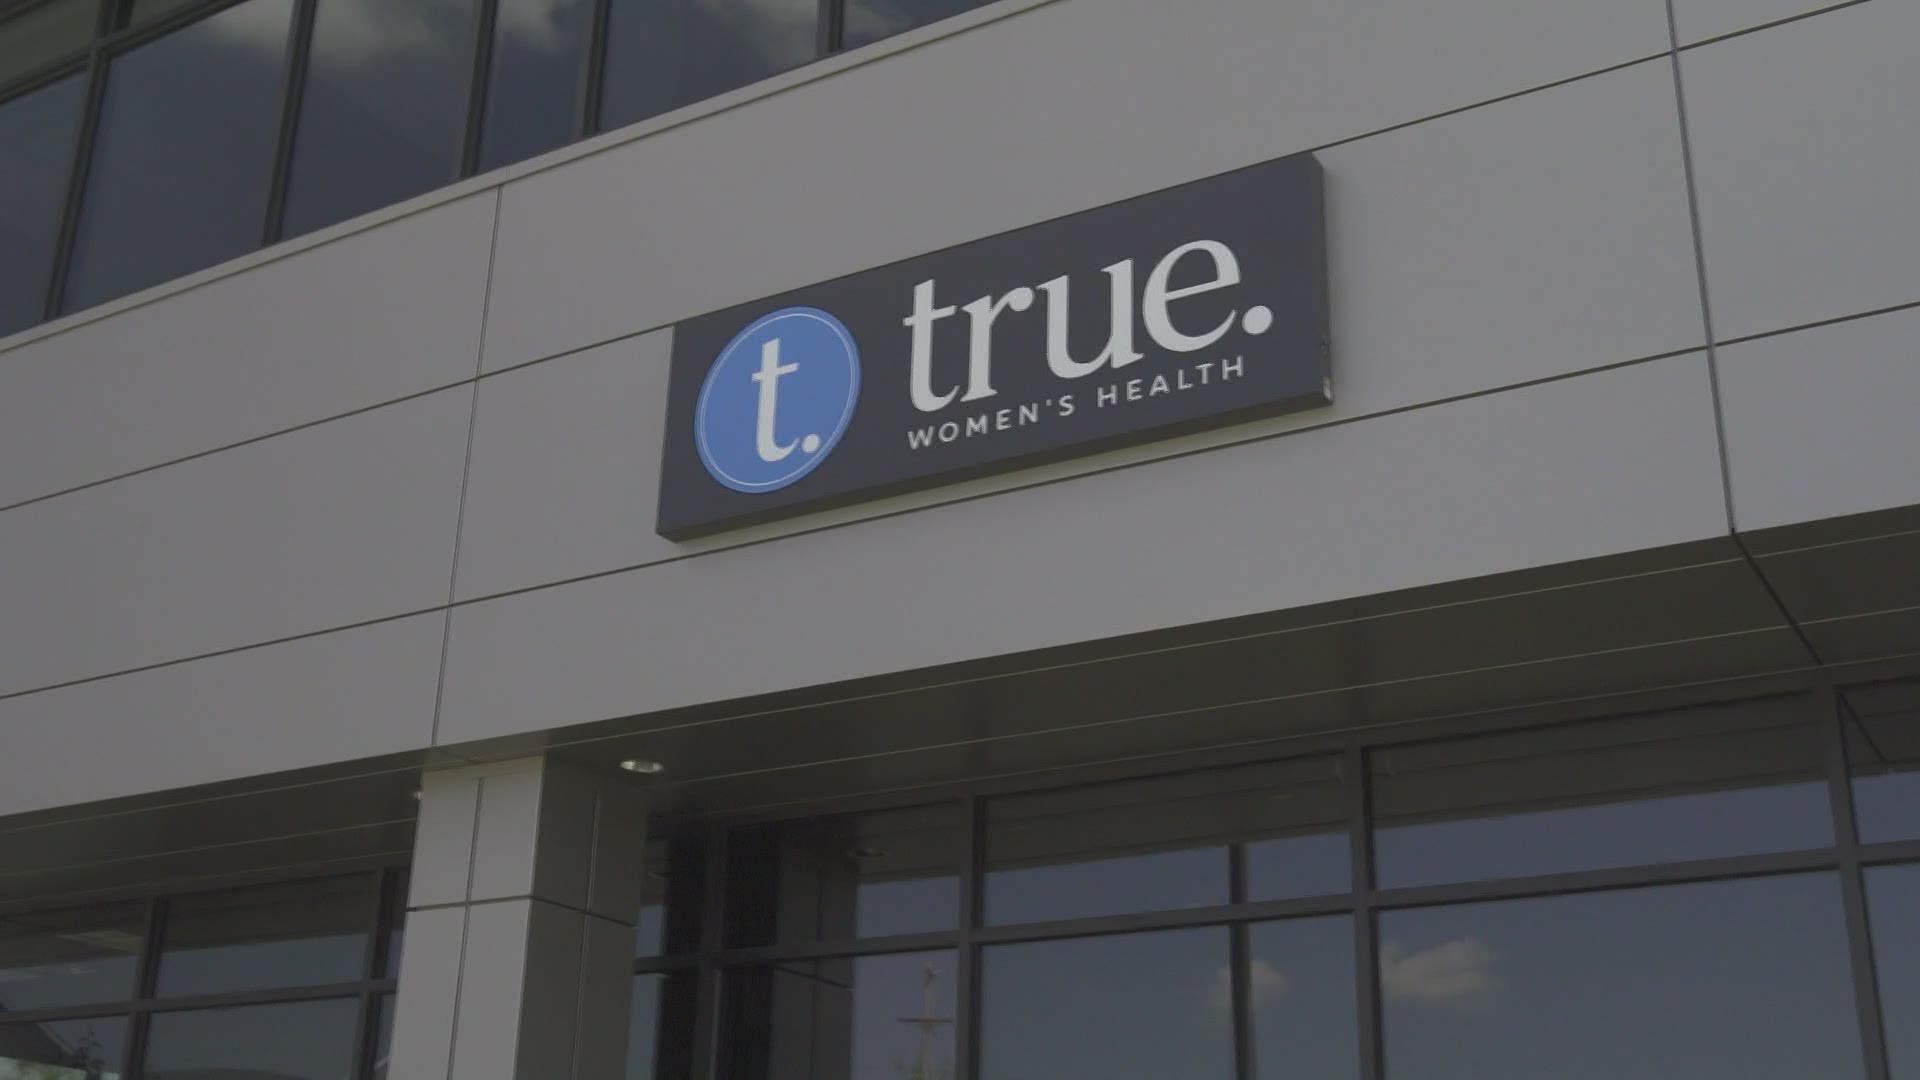 New women's clinic True Women's Health caters to women's specific health care needs